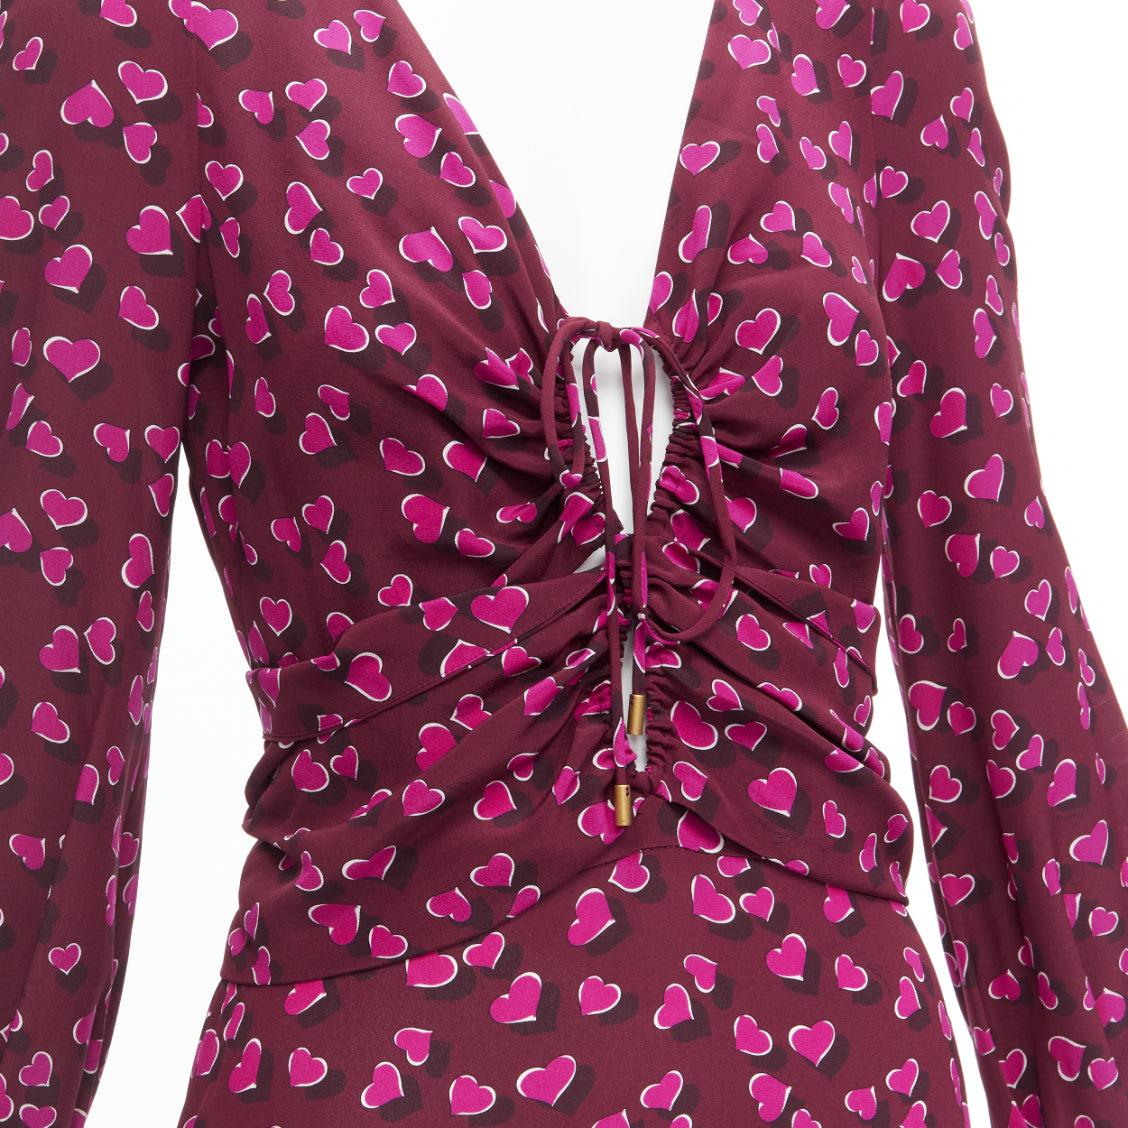 new GUCCI 2014 Runway Heart On My Sleeve 100% silk plunge neck gown dress IT38 XS
Reference: TGAS/D00754
Brand: Gucci
Model: Heart on my Sleeve
Collection: 2014 Resort - Runway
Material: Silk
Color: Burgundy, Pink
Pattern: Abstract
Closure: